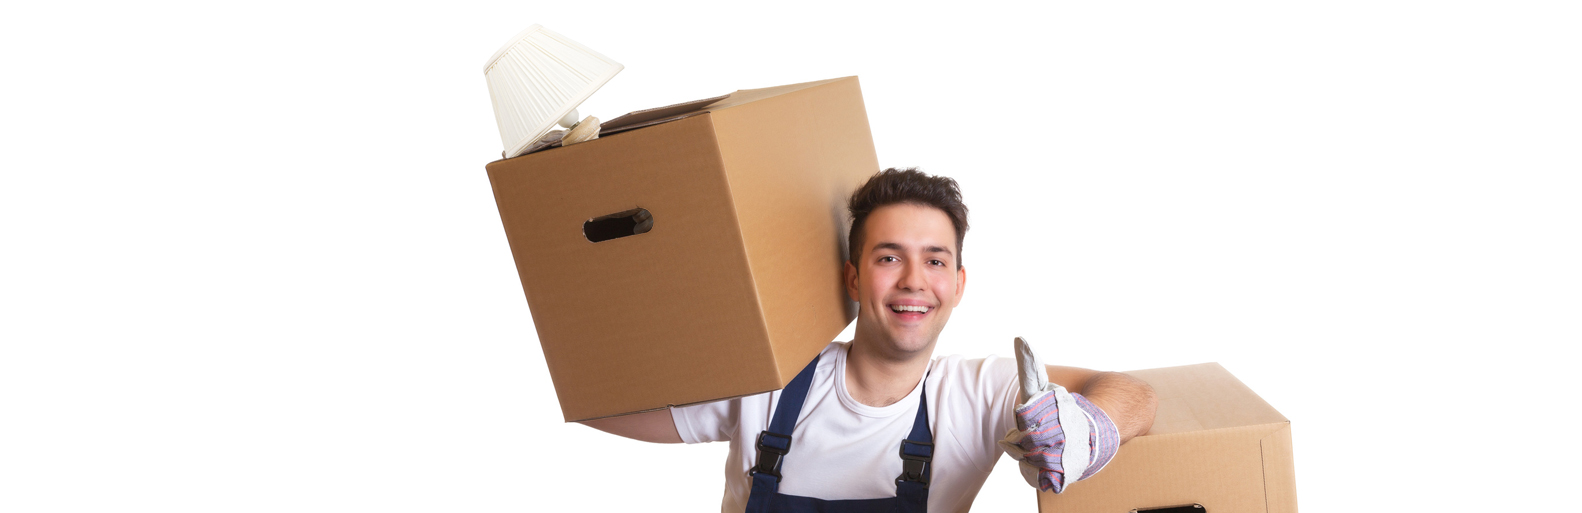 Professional Office Packers & Movers in Dubai: Streamlining Relocations with Expertise